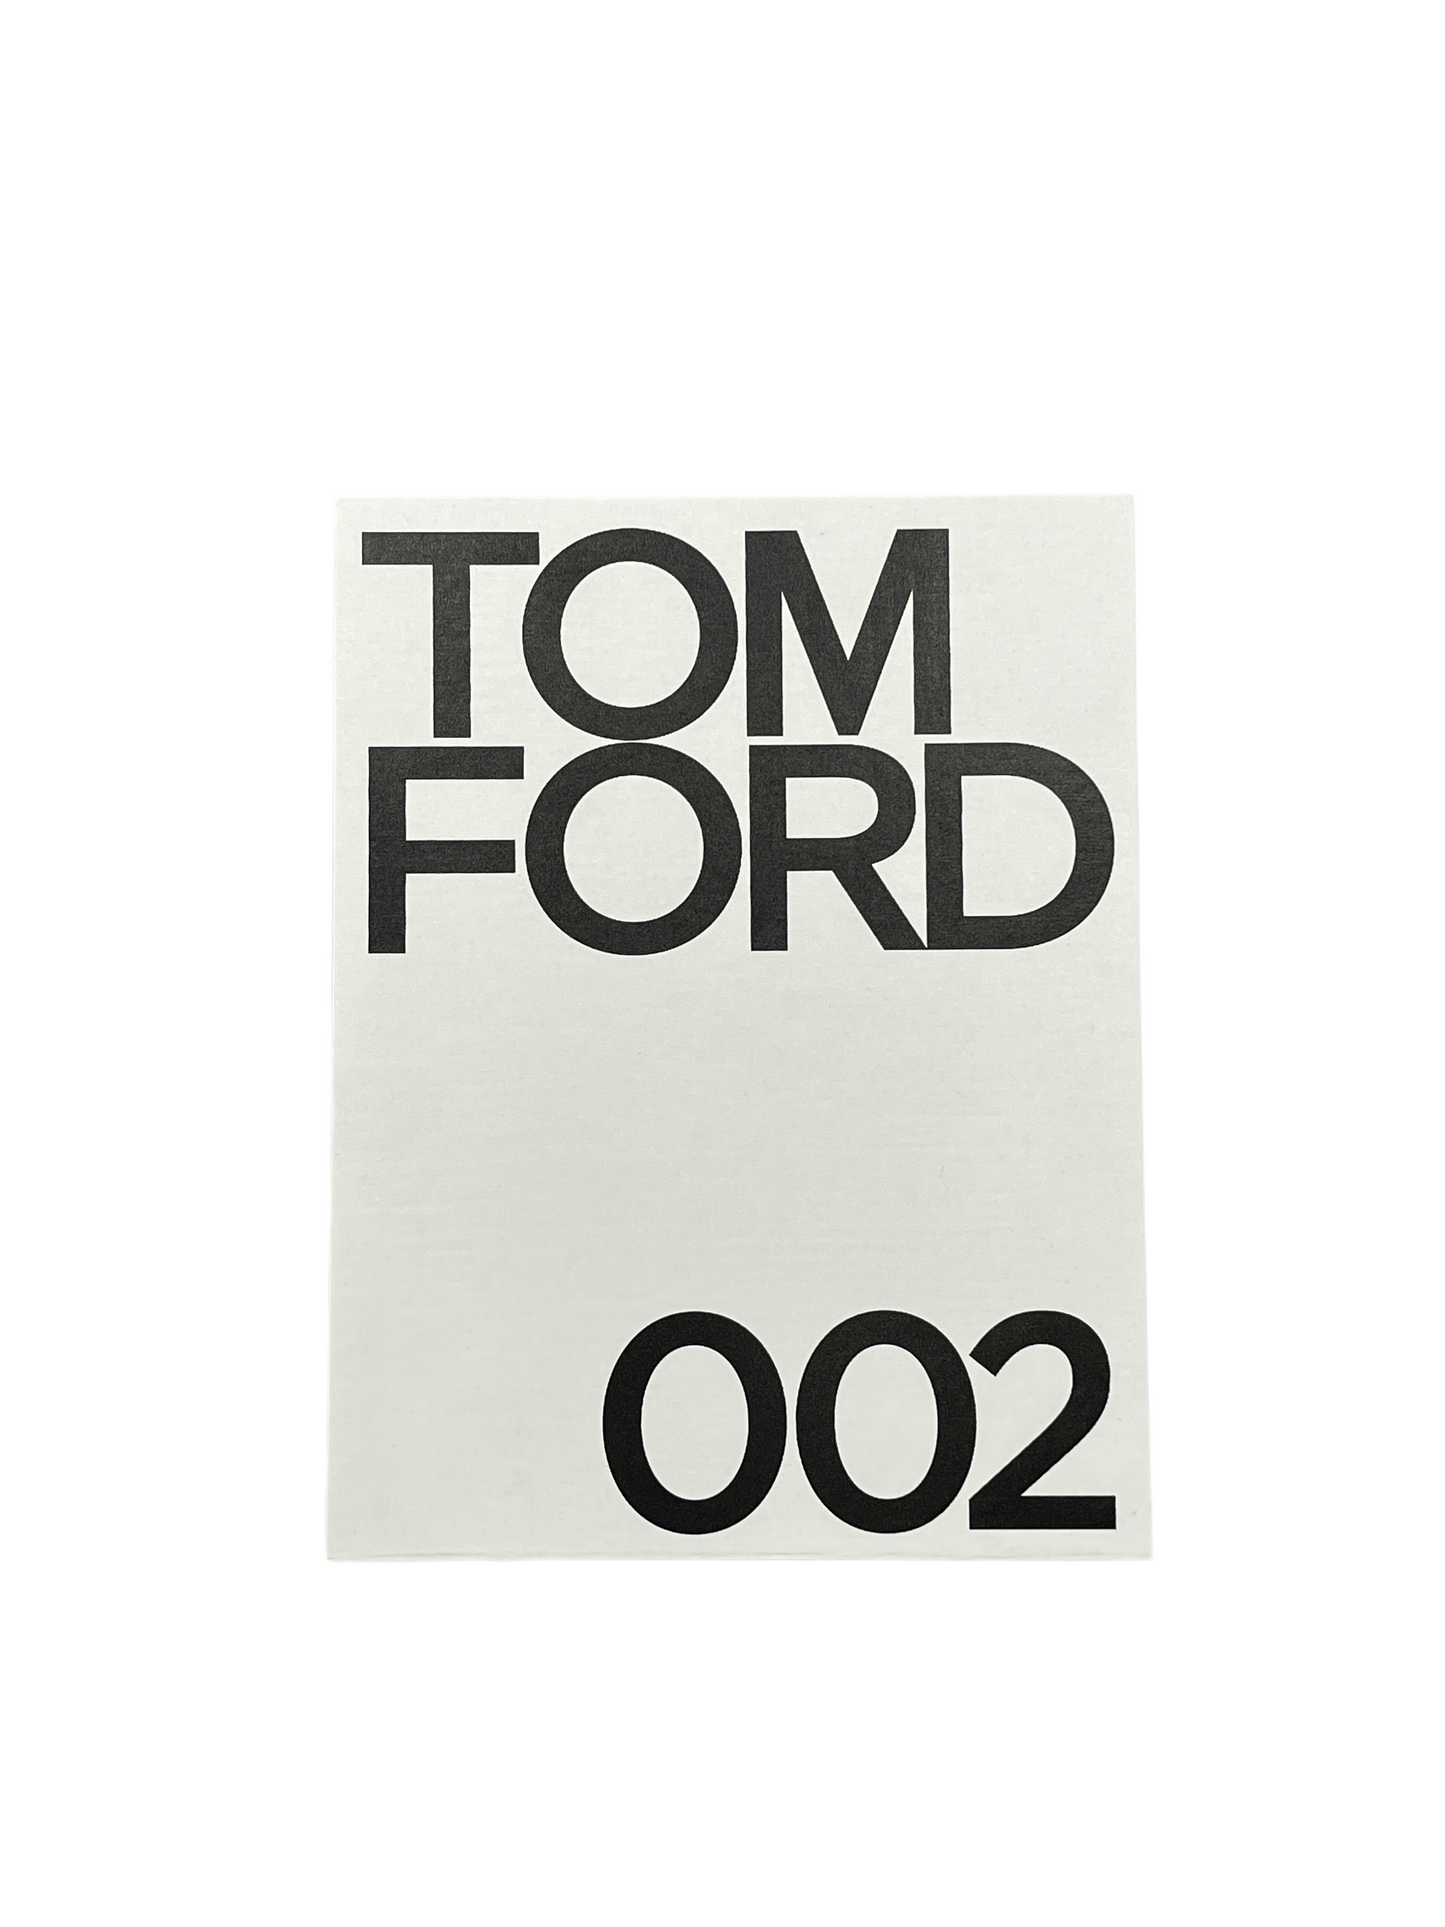 TOM FORD: 002 Coffee Table Book —Genuine Design luxury consignment Calgary, Alberta, Canada New and pre-owned clothing, shoes, accessories.